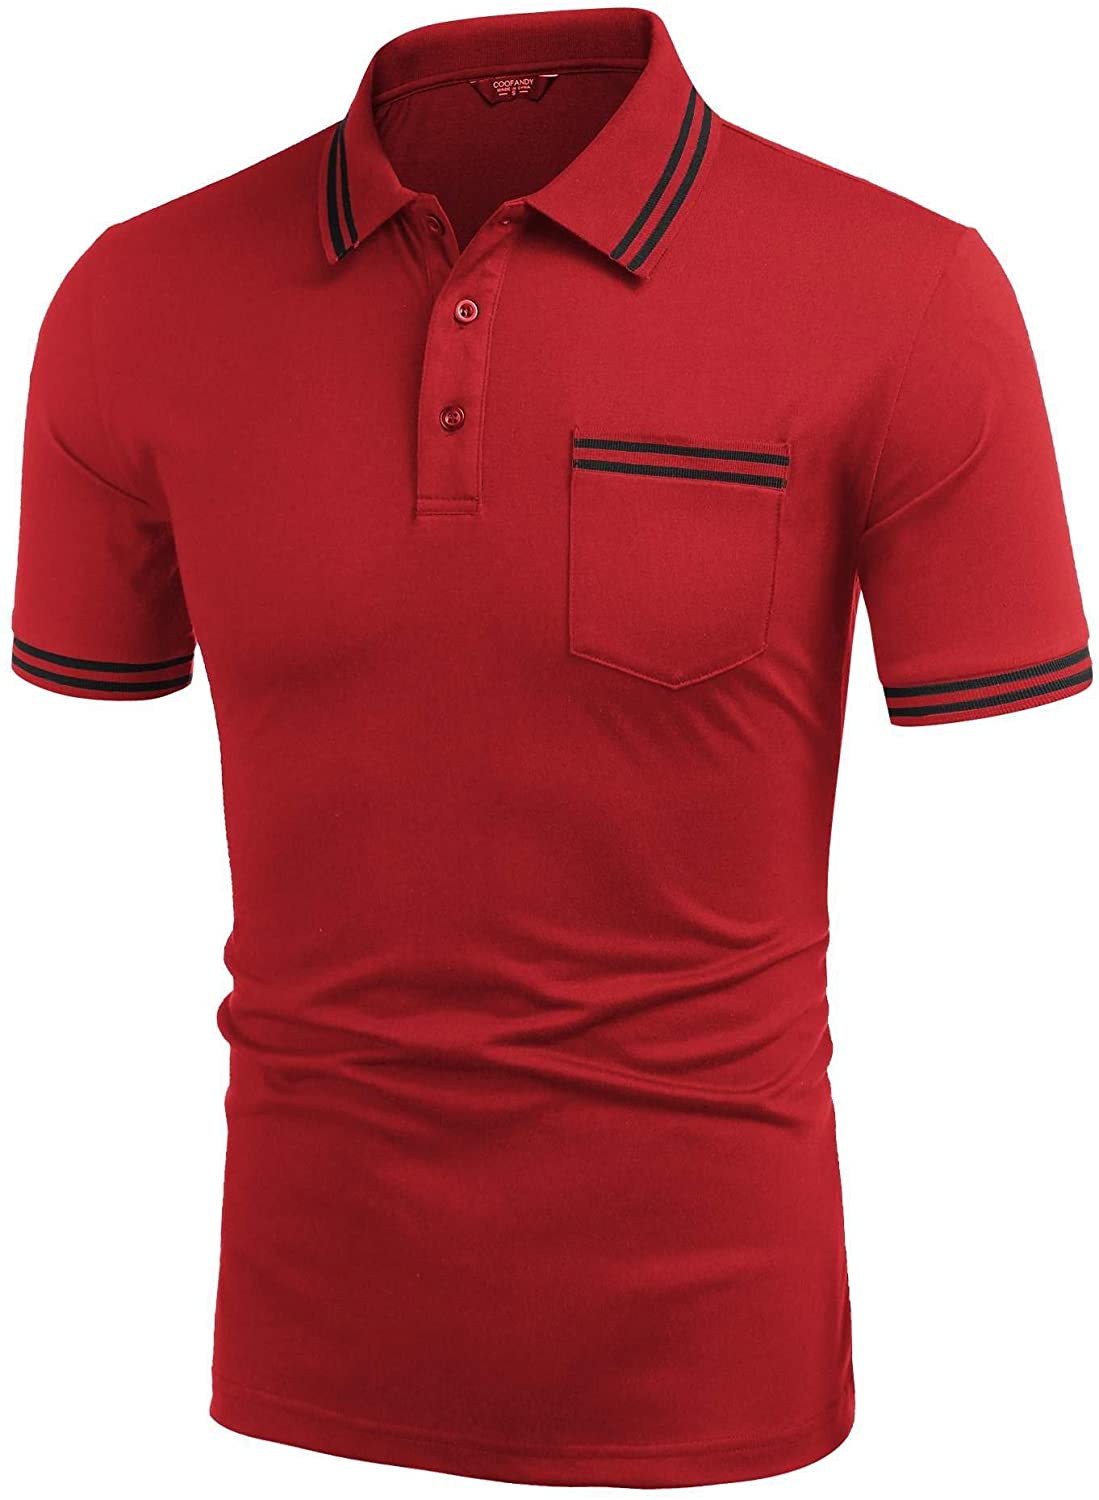 COOFANDY Mens Short Sleeve Polo Shirt Casual Striped Collar Classic Fit Cotton T Shirts